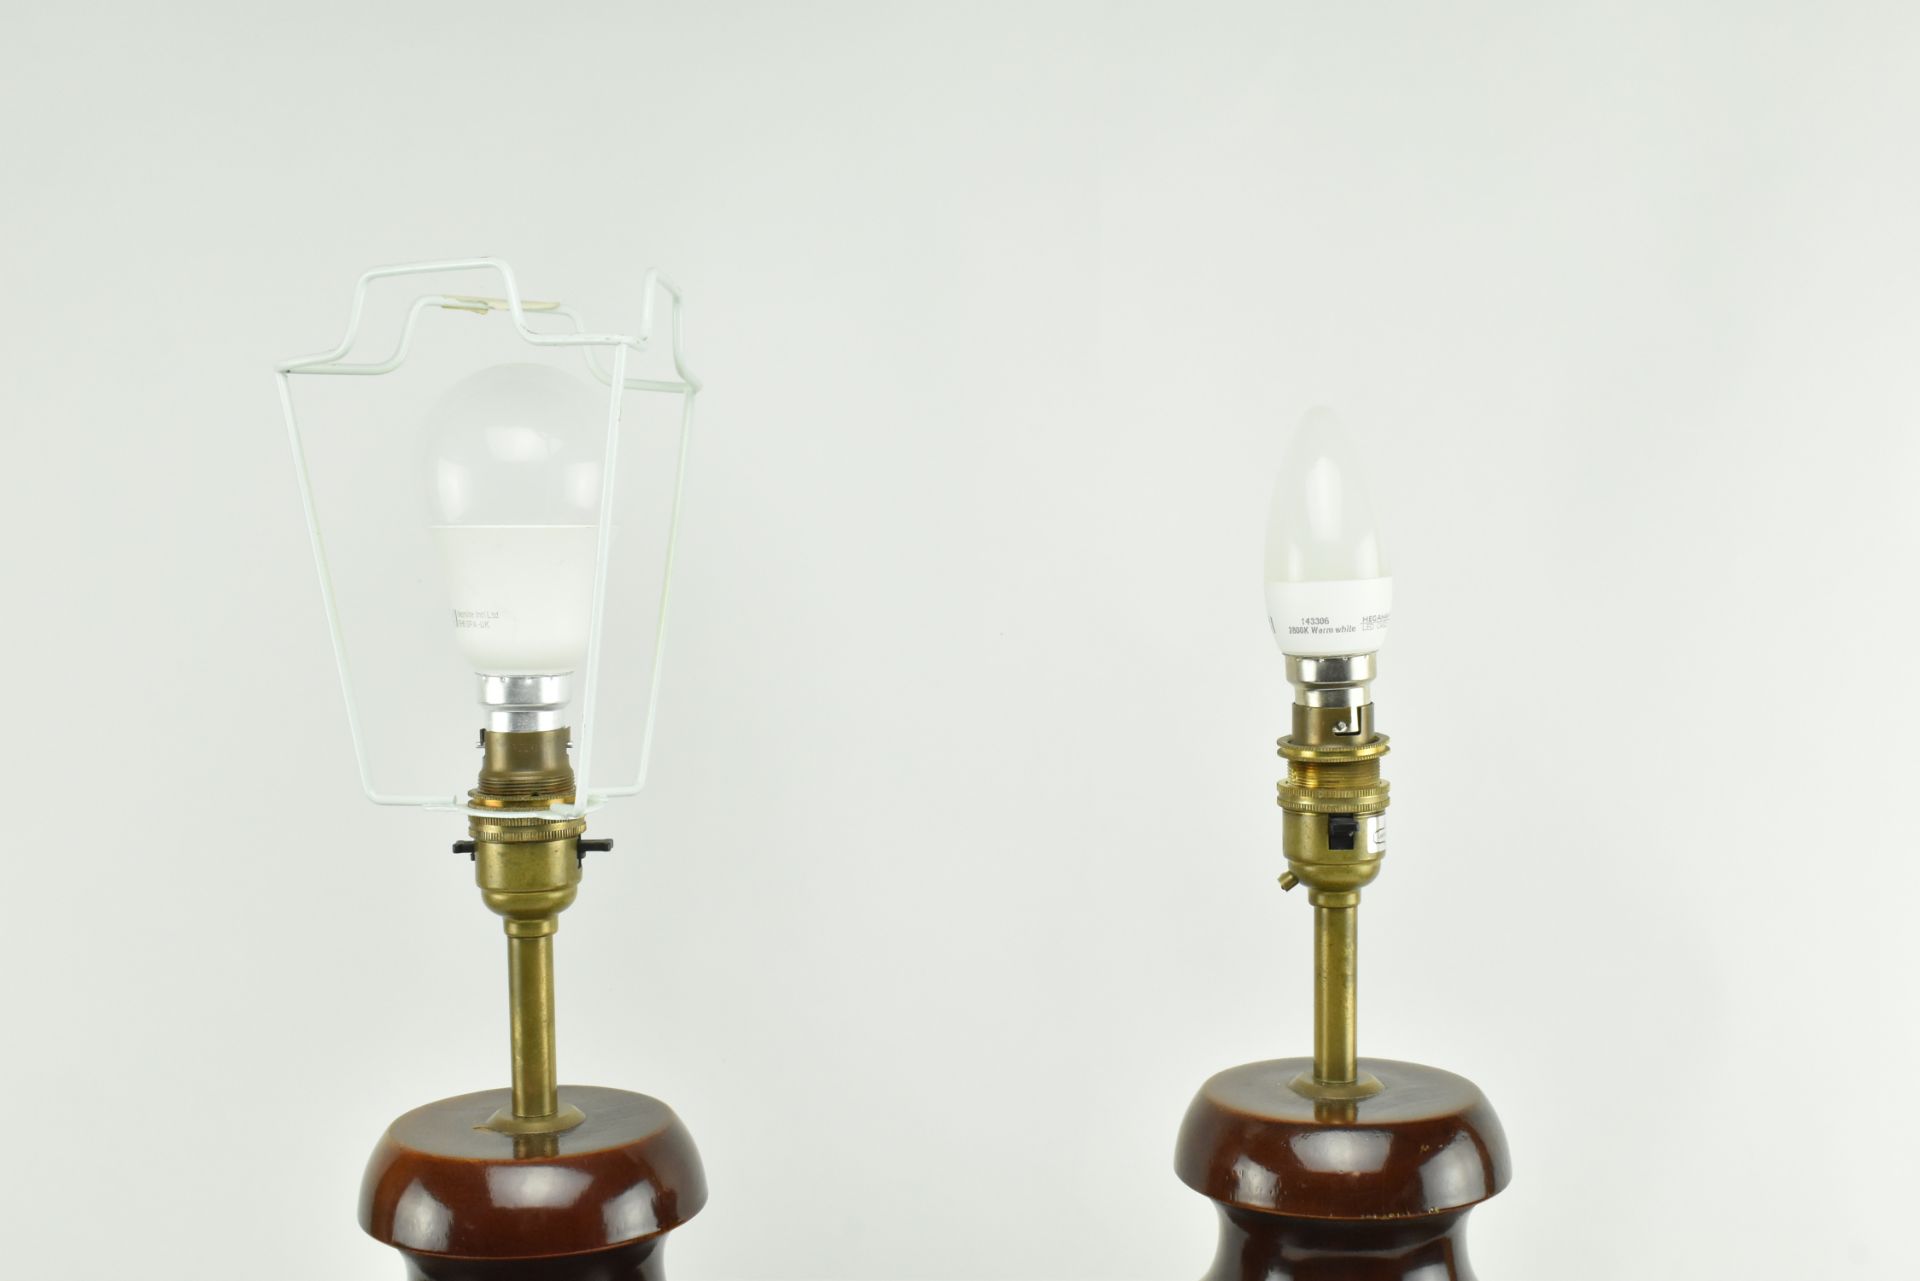 PAIR OF TURNED WOODEN DESK LAMPS IN PORTA ROMANA MANNER - Image 2 of 6